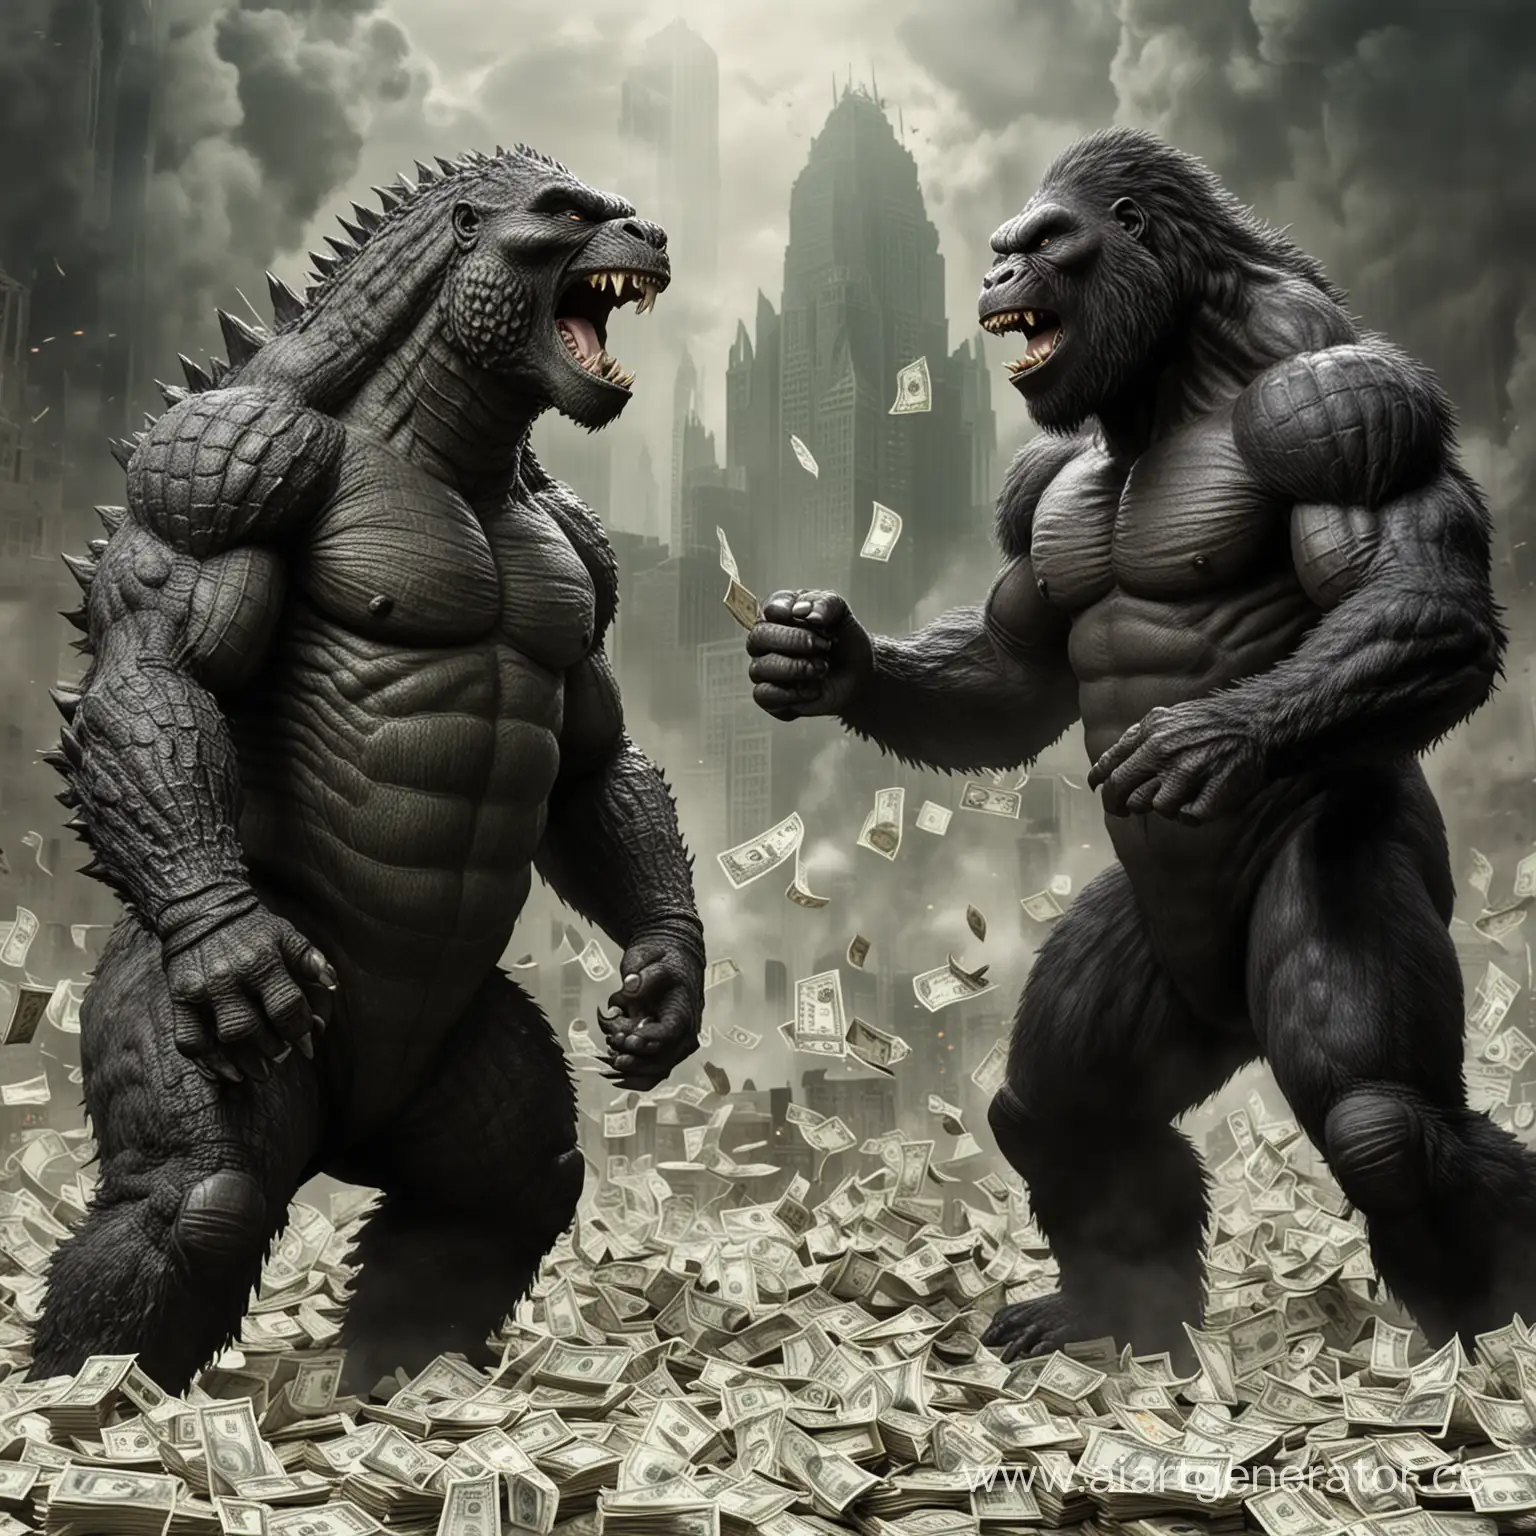 Godzilla and King Kong very happy together with money all around them